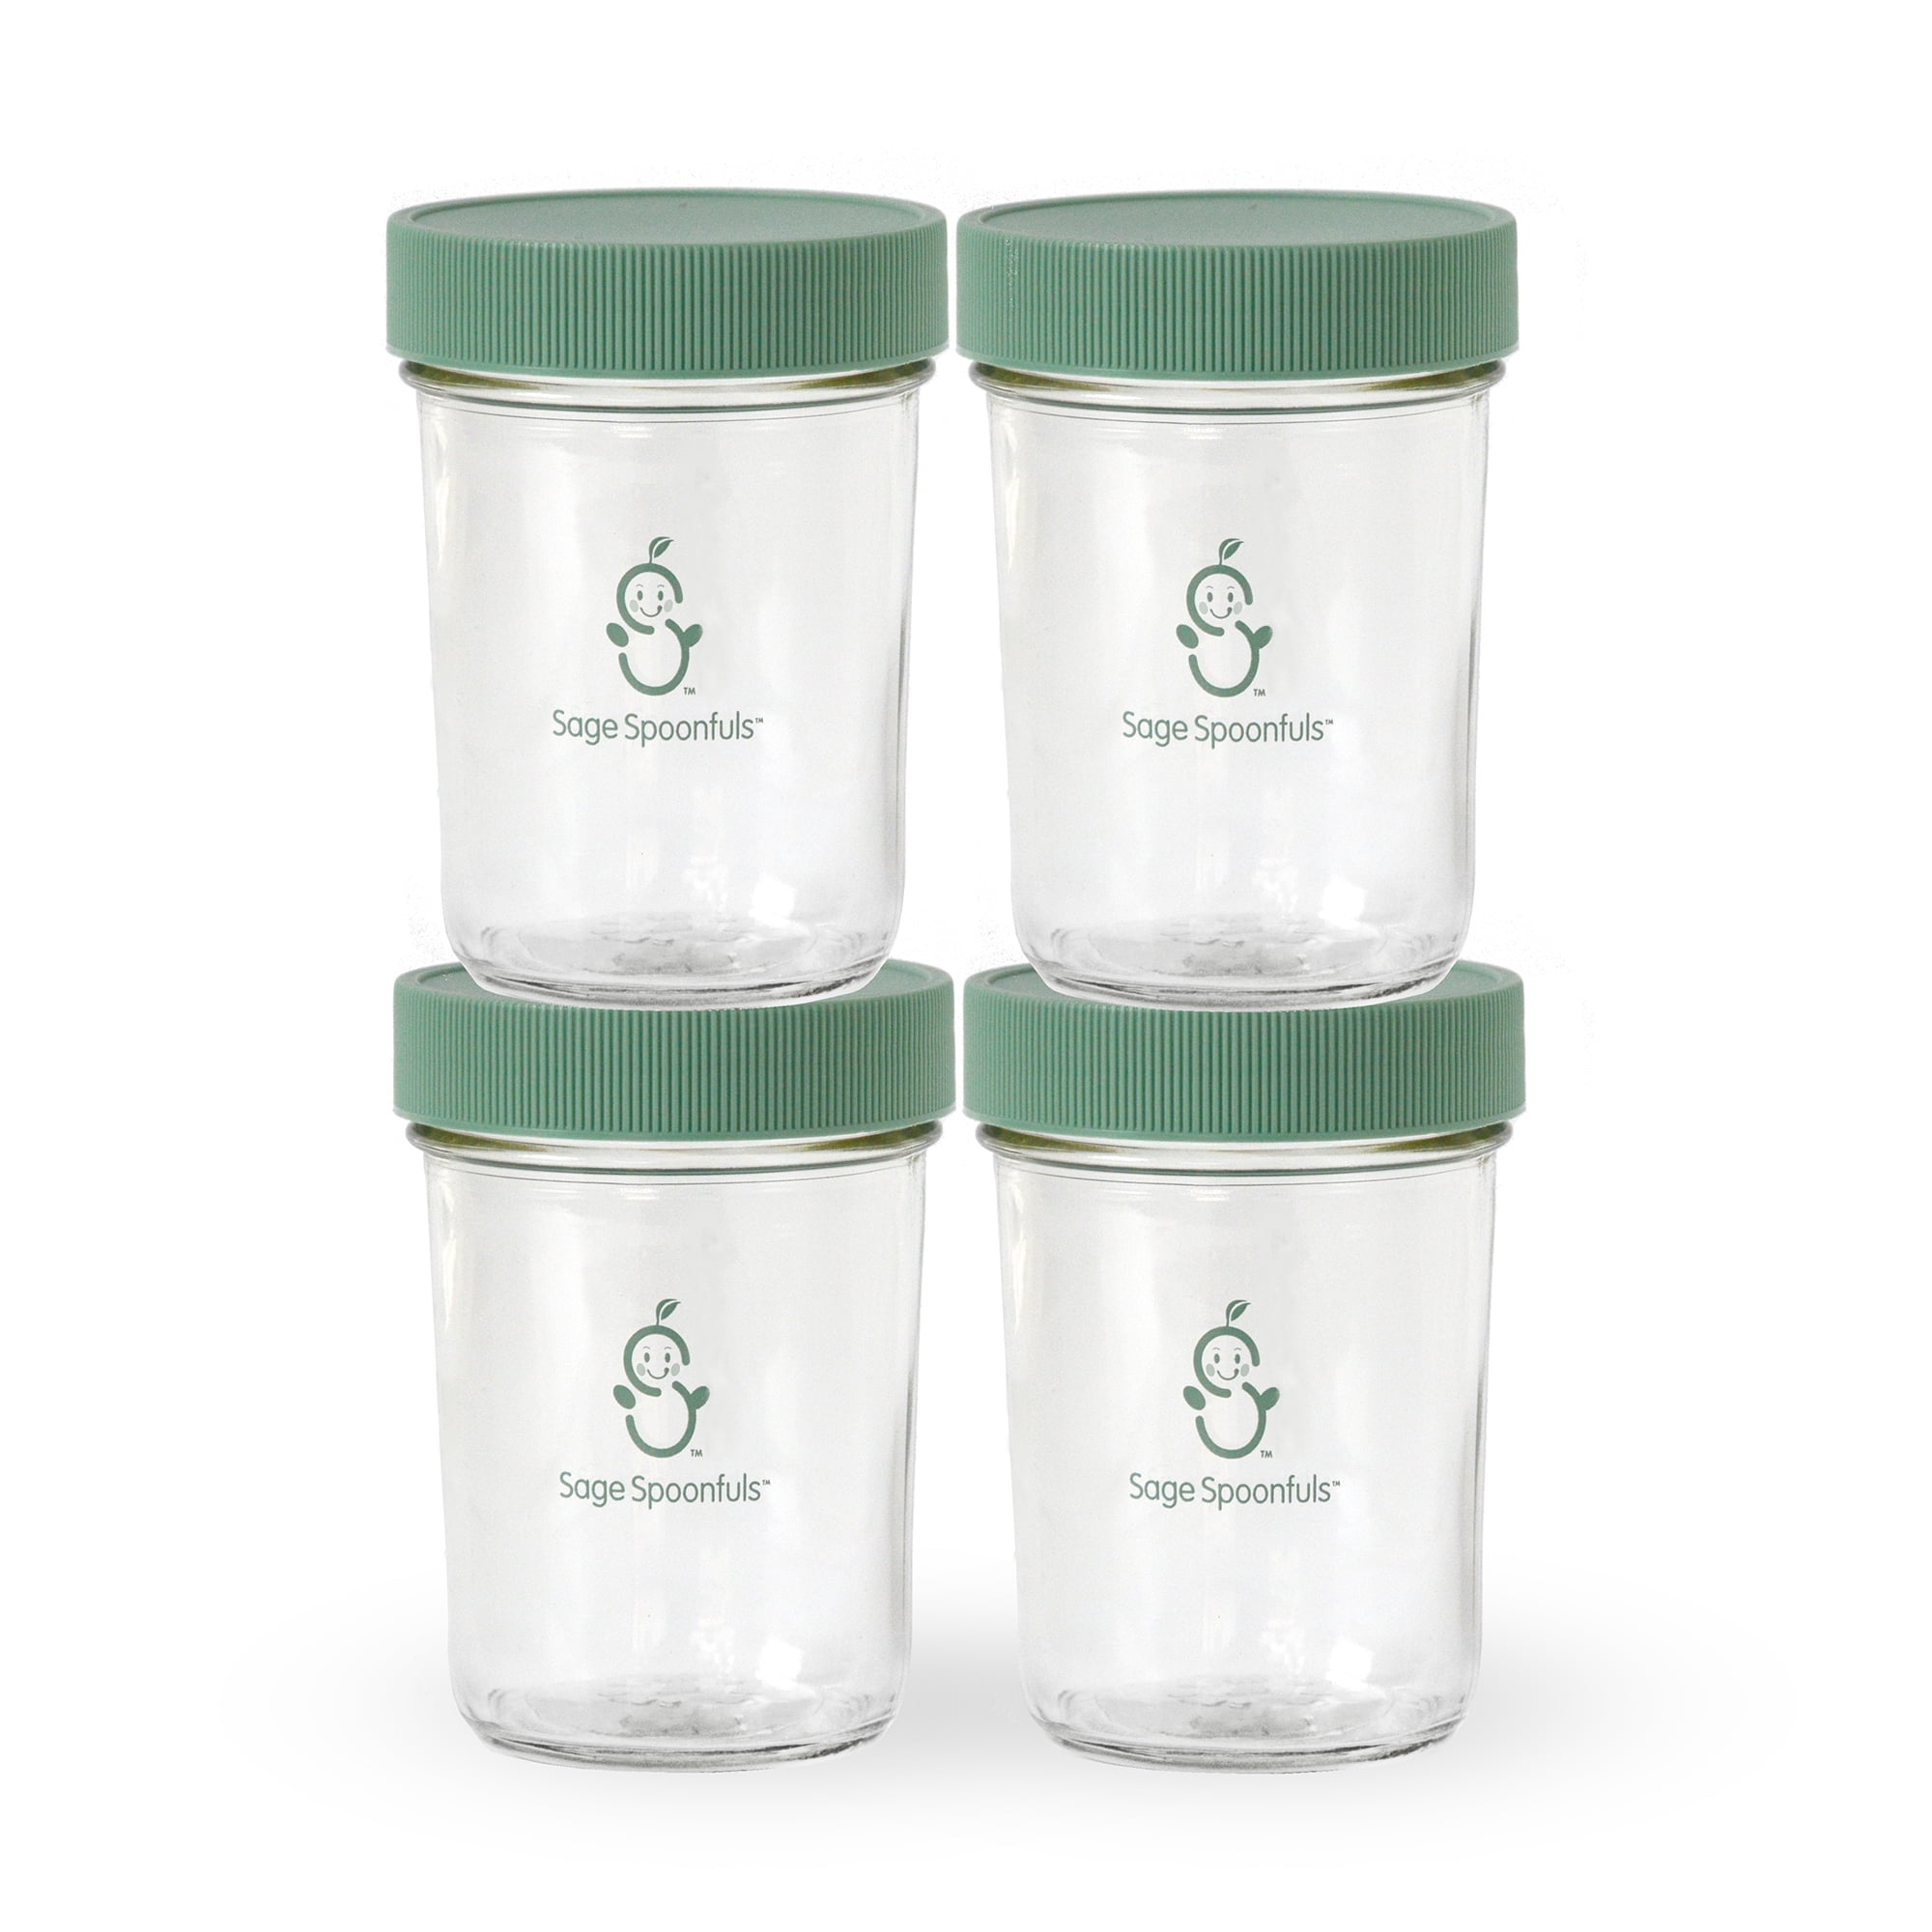 baby food glass containers